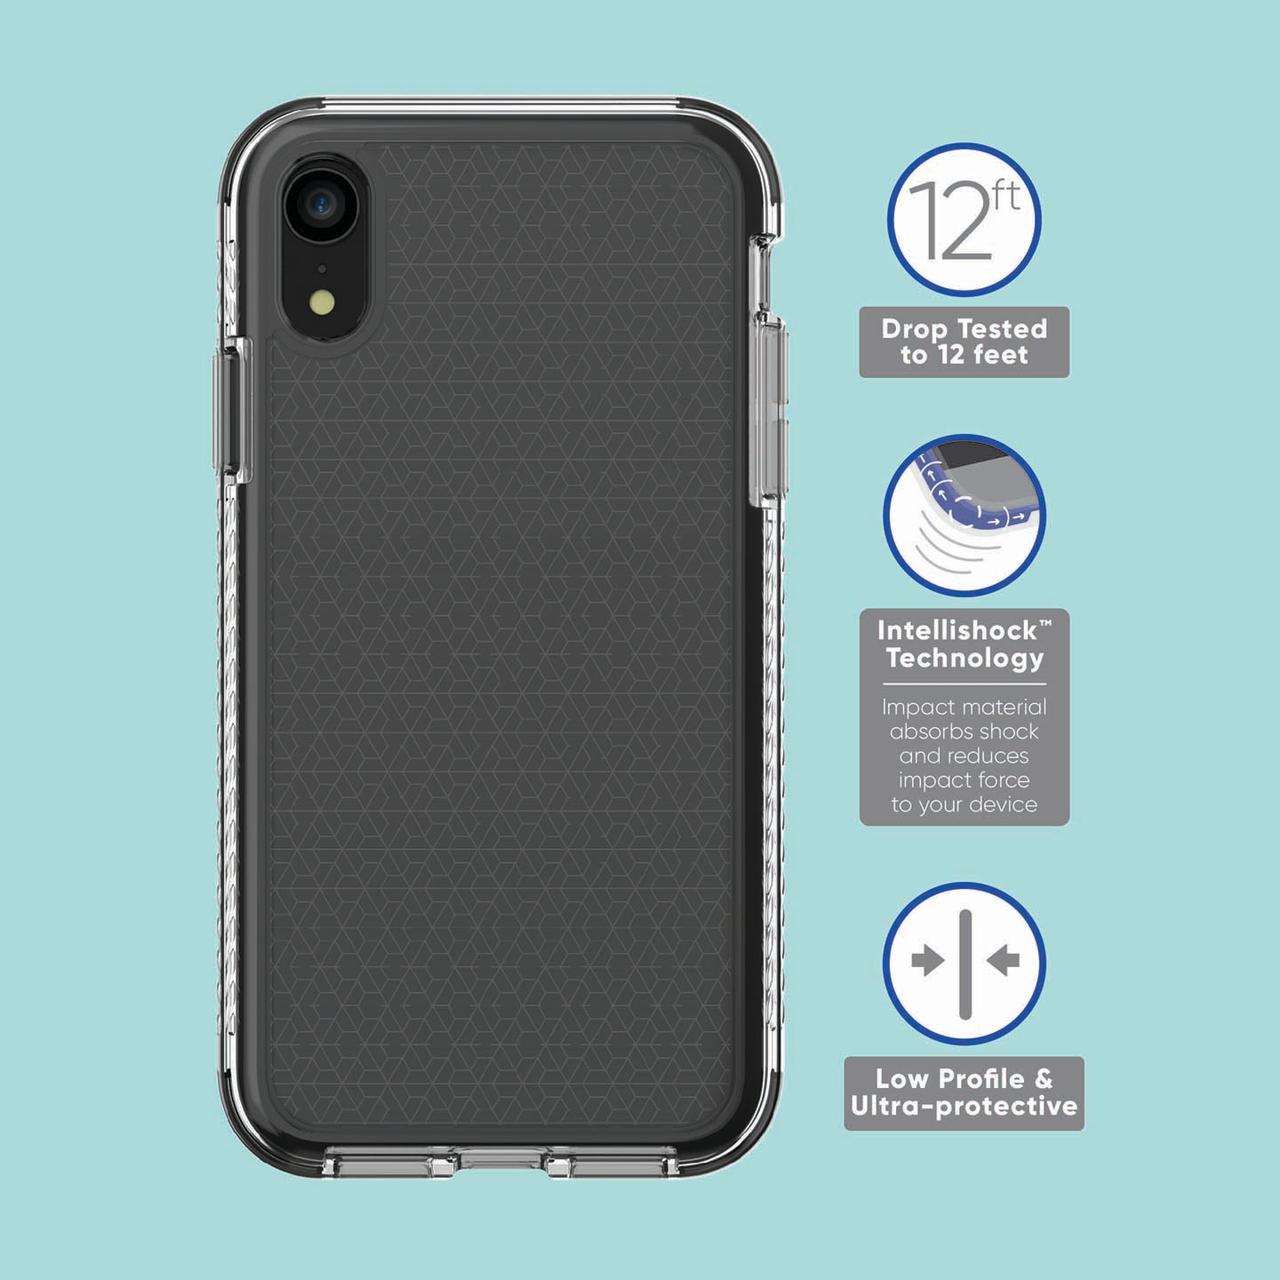 onn. Impact Case with Intellishock Technology for iPhone XR - image 1 of 6